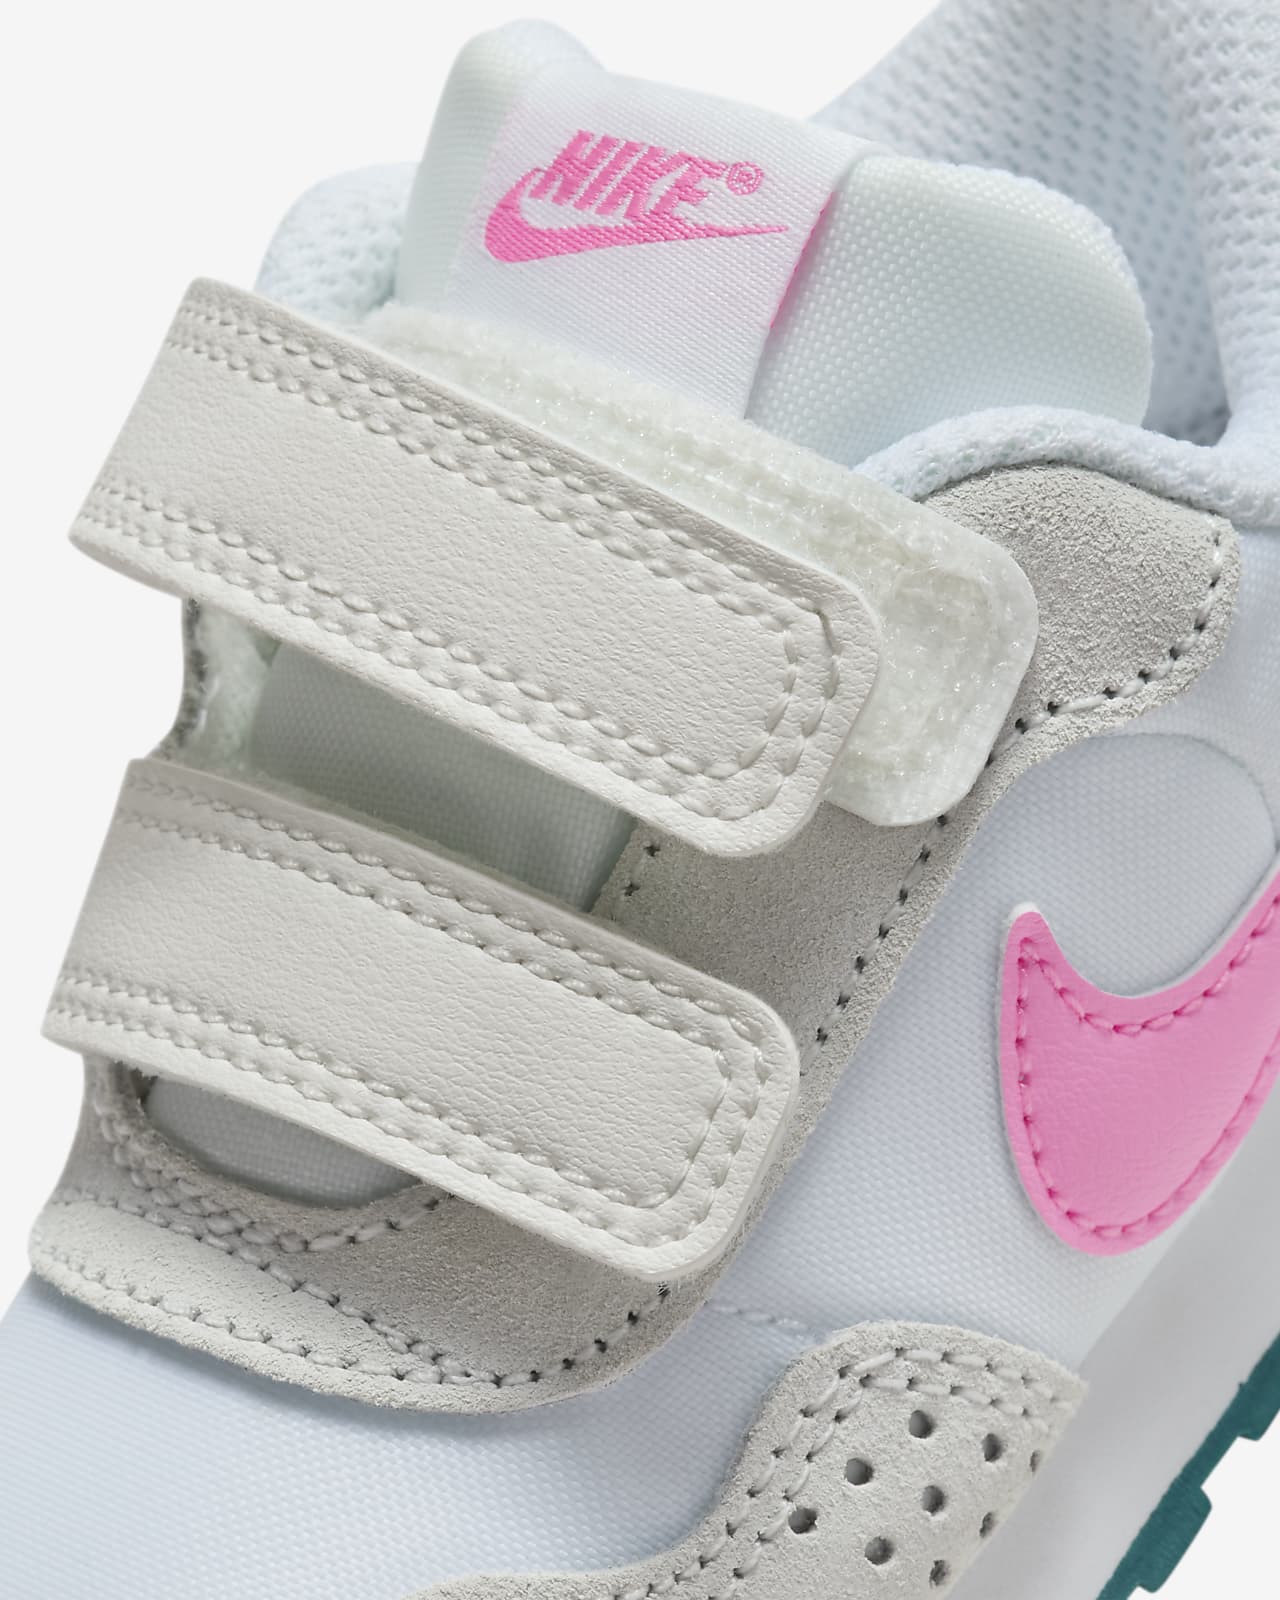 Nike MD Valiant Baby and Toddler Nike Shoe. ID